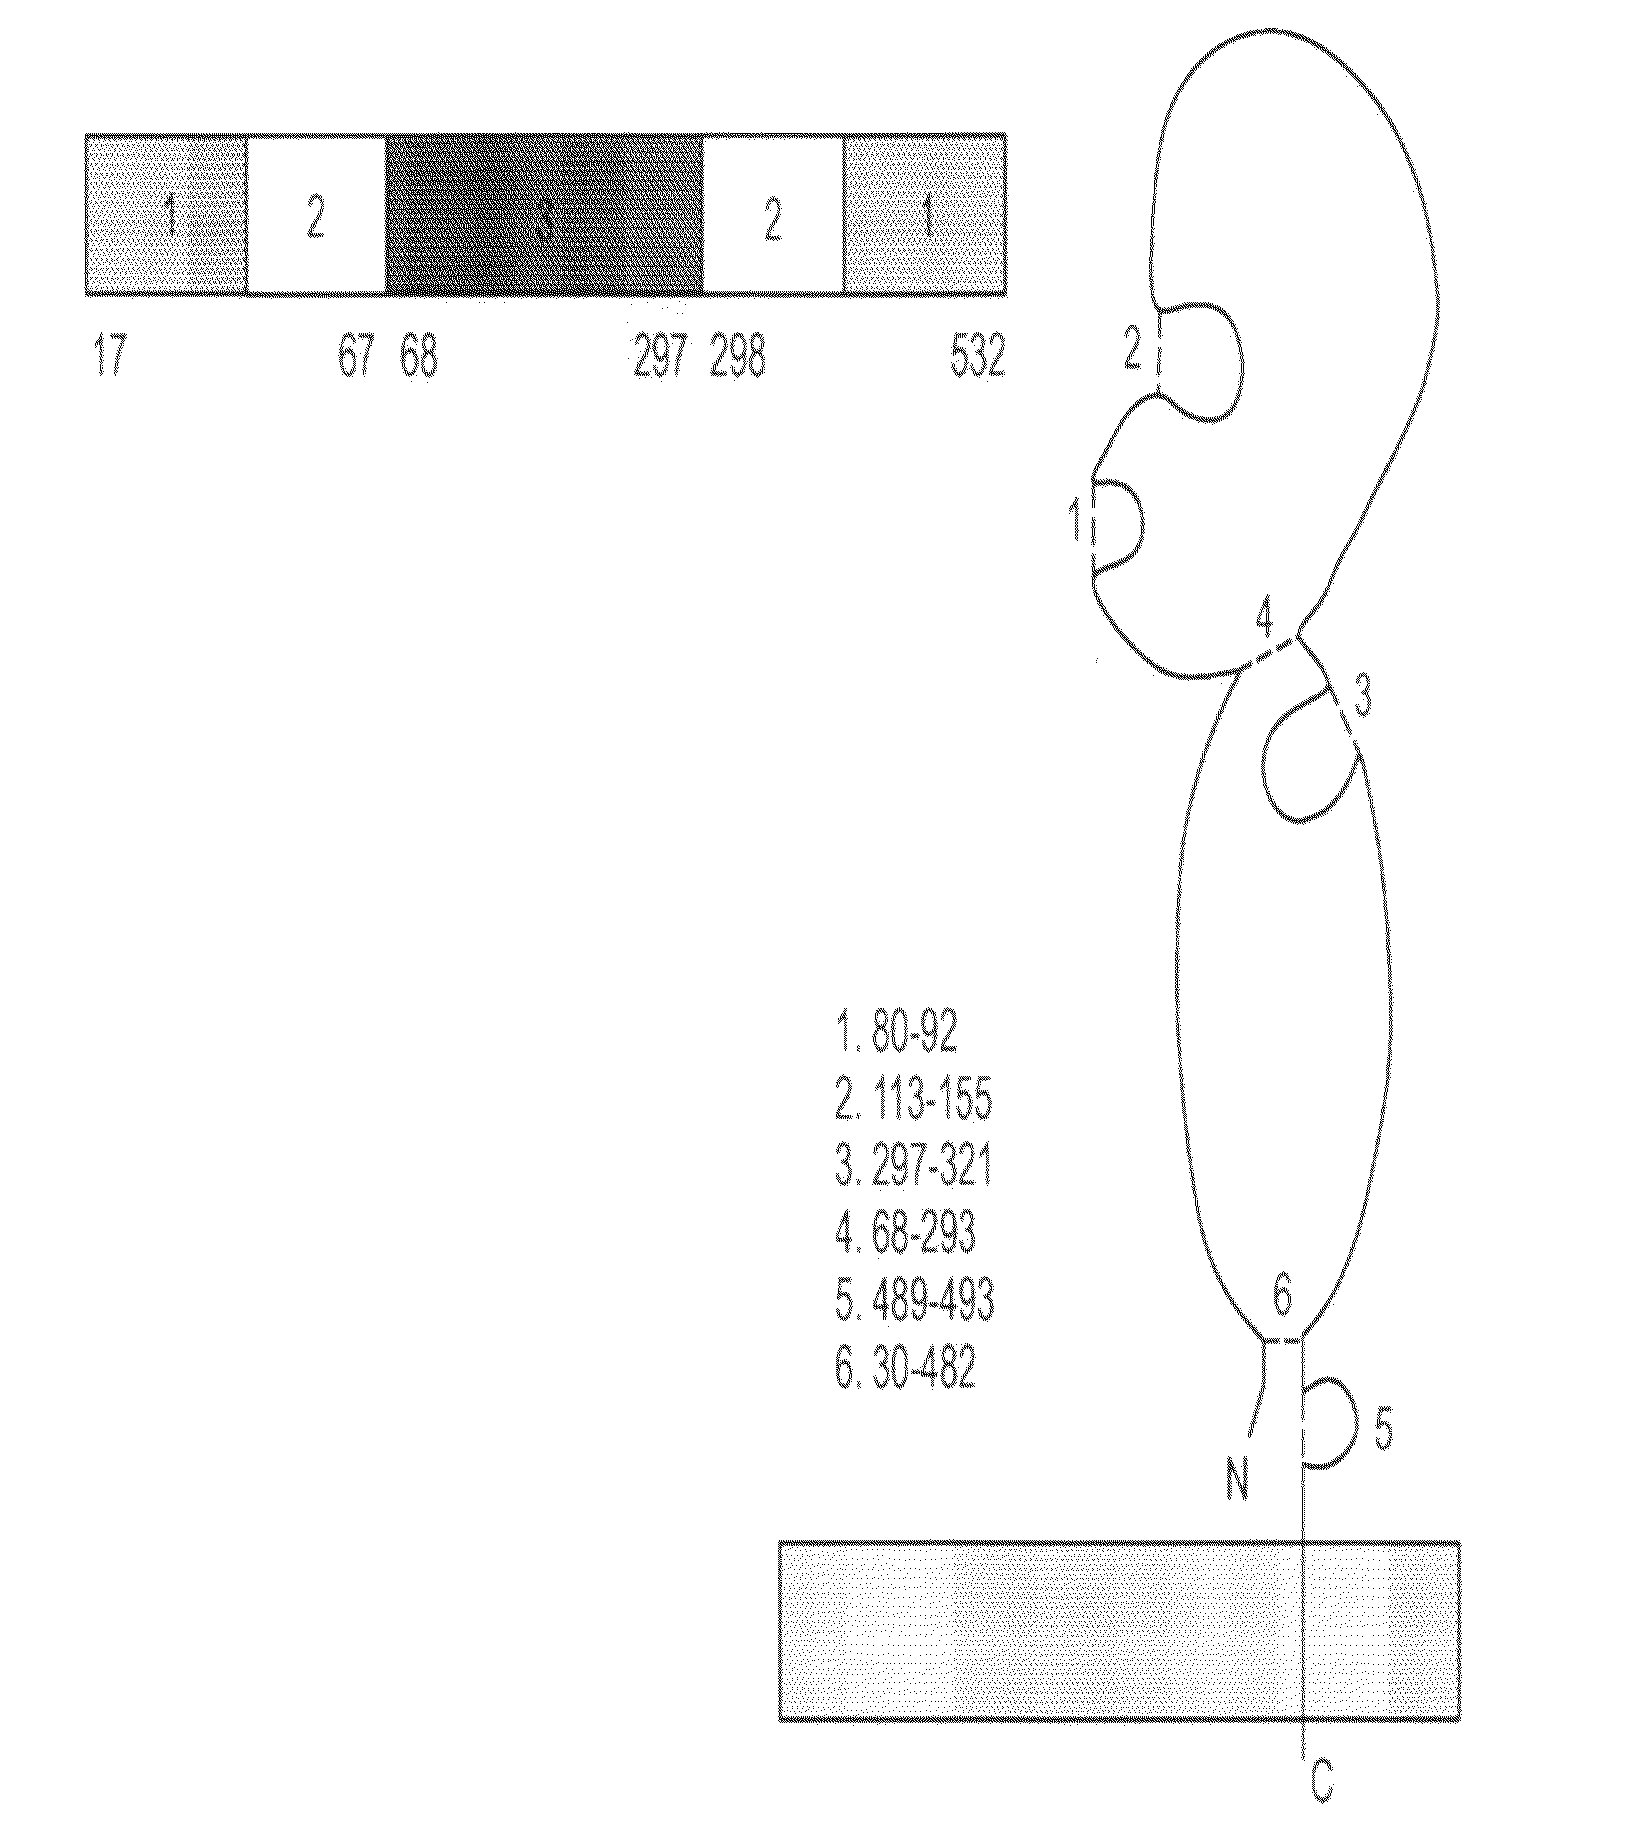 Prophylactic and therapeutic influenza vaccines, antigens, compositions and methods